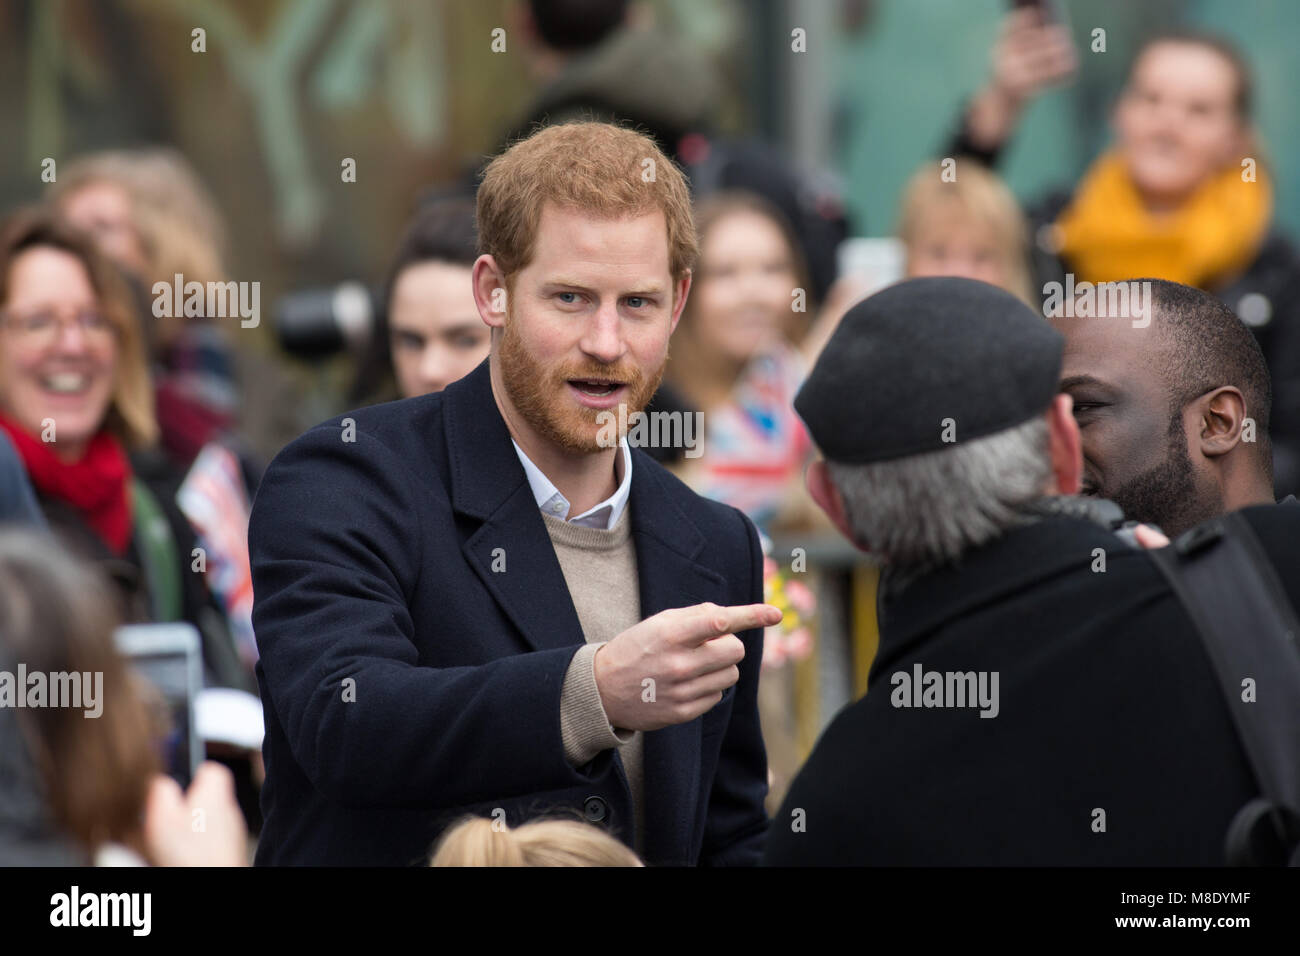 Megan Markle and Prince Harry visited Millennium Point in Birmingham on International Women's Day. Prince Harry talking to fans on arrival. Stock Photo